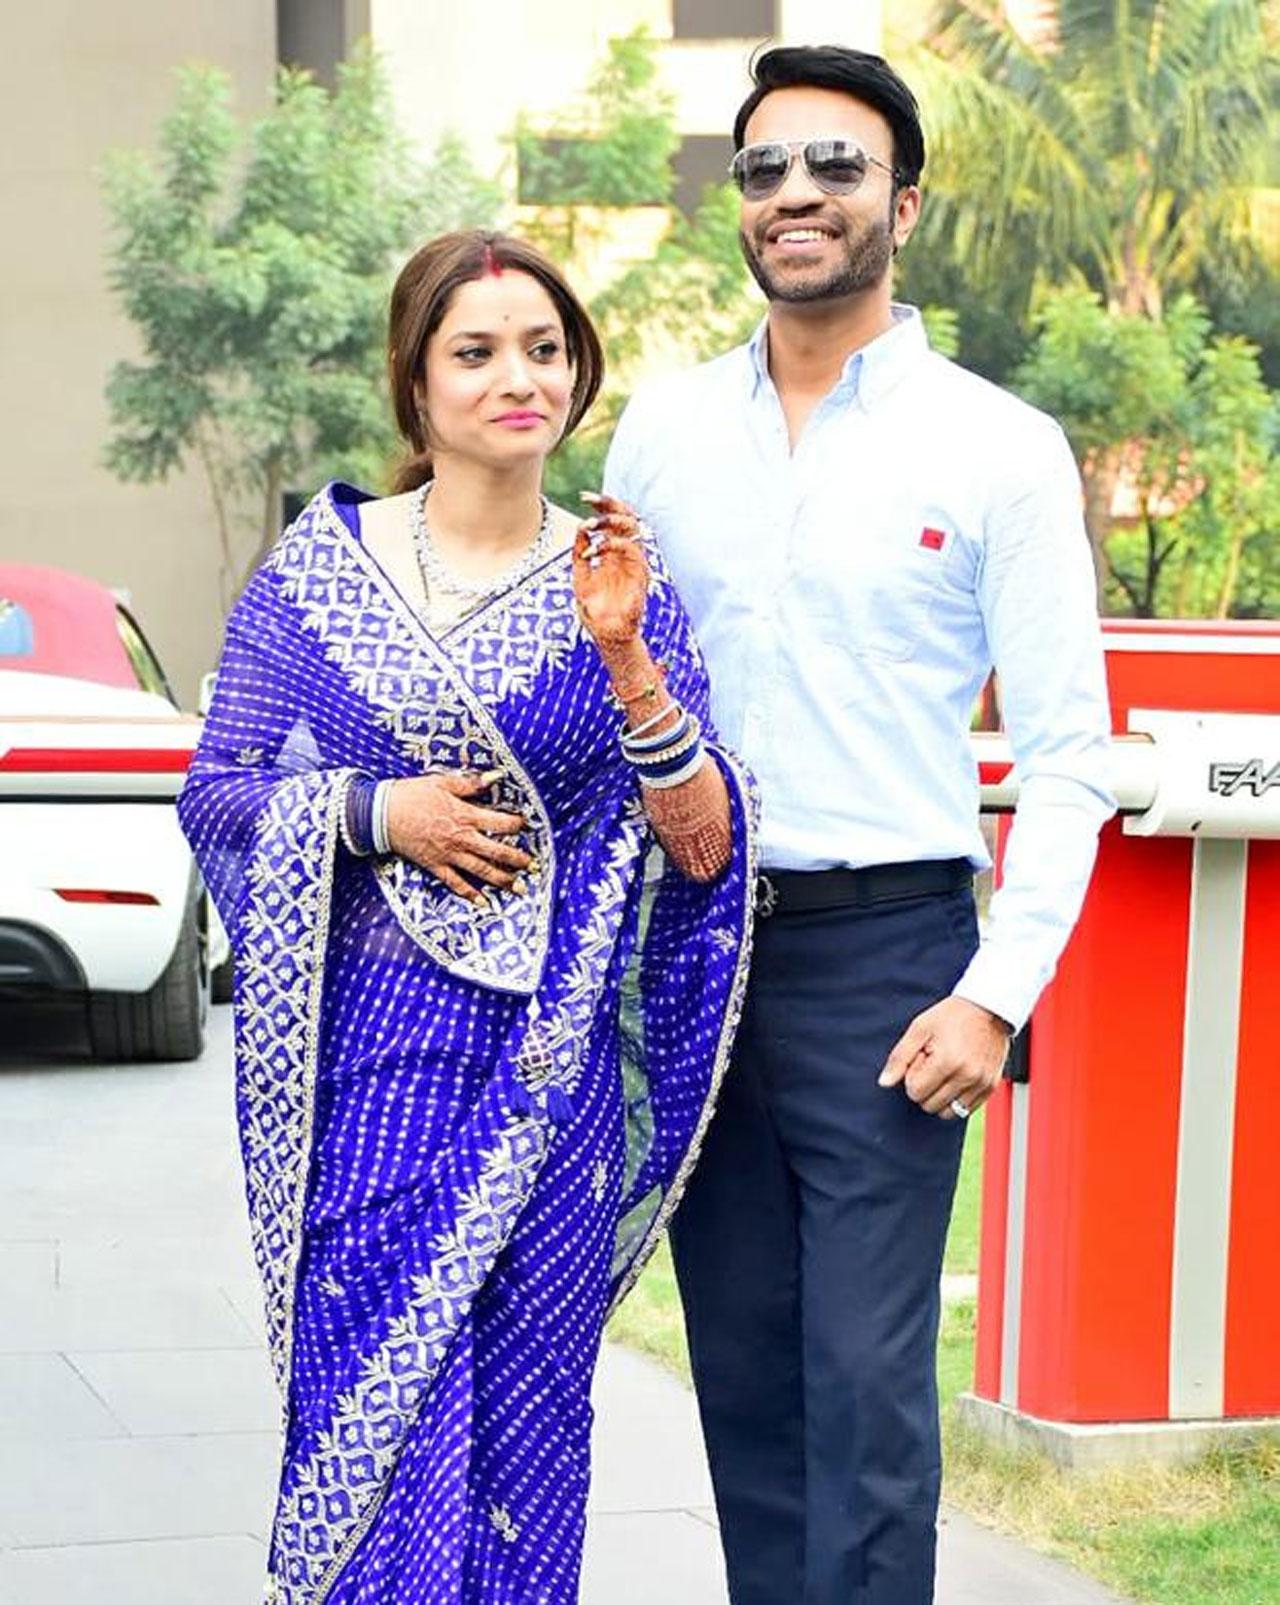 The actress donned a stunning and ravishing blue saree with embroidery and also accompanied it with a gorgeous piece of jewelry. Vicky Jain, on the other hand, pulled of his formal look with elan.